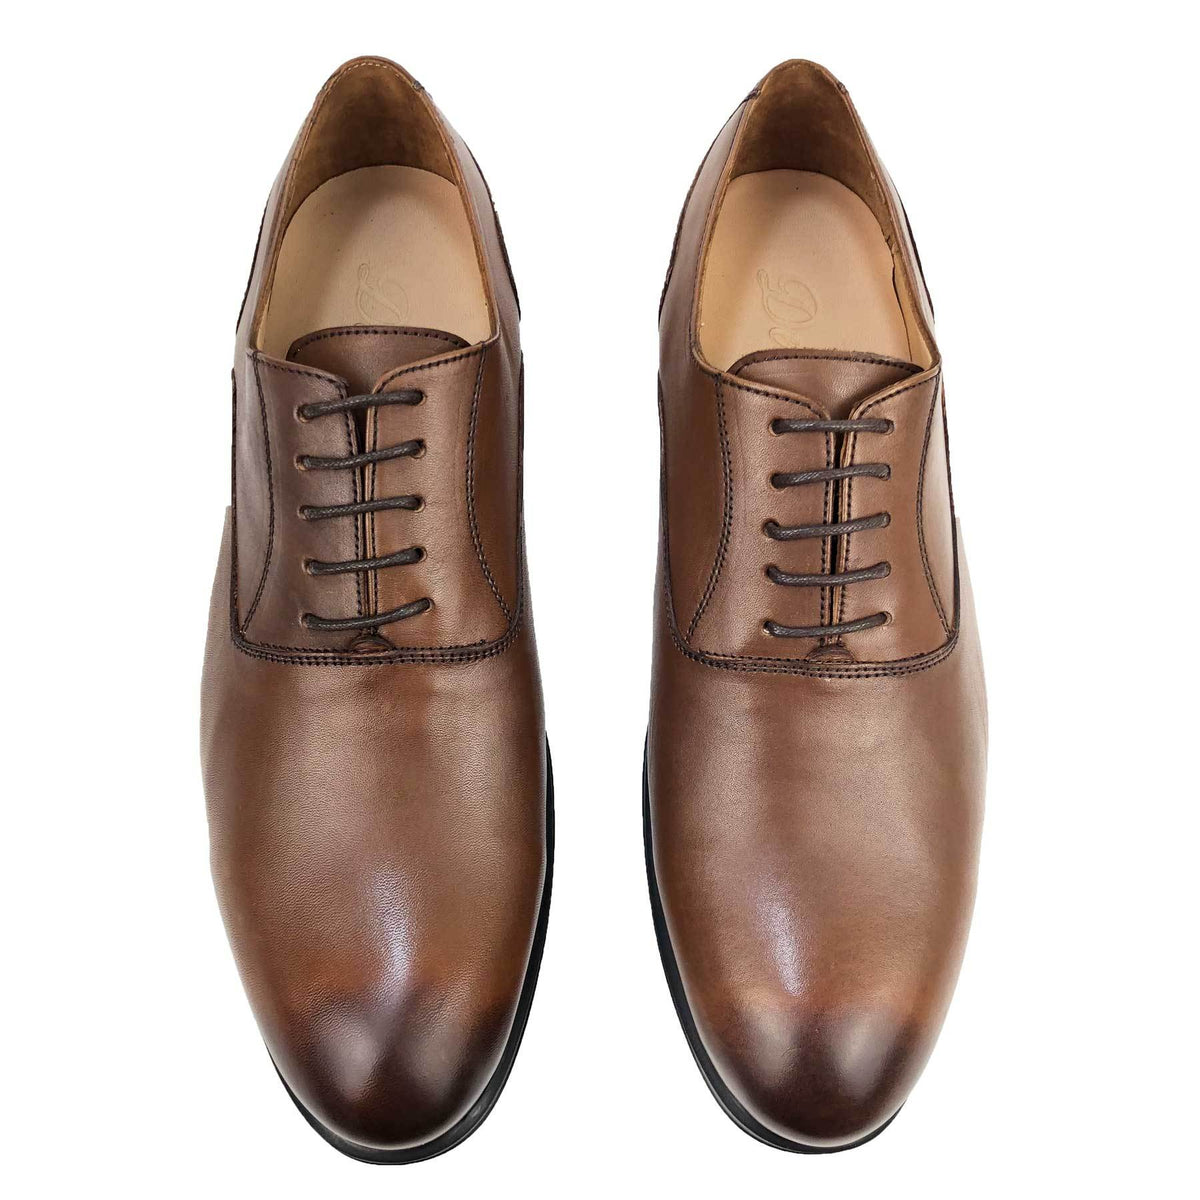 CH1336-015 - Chaussure cuir Taba - deluxe-maroc